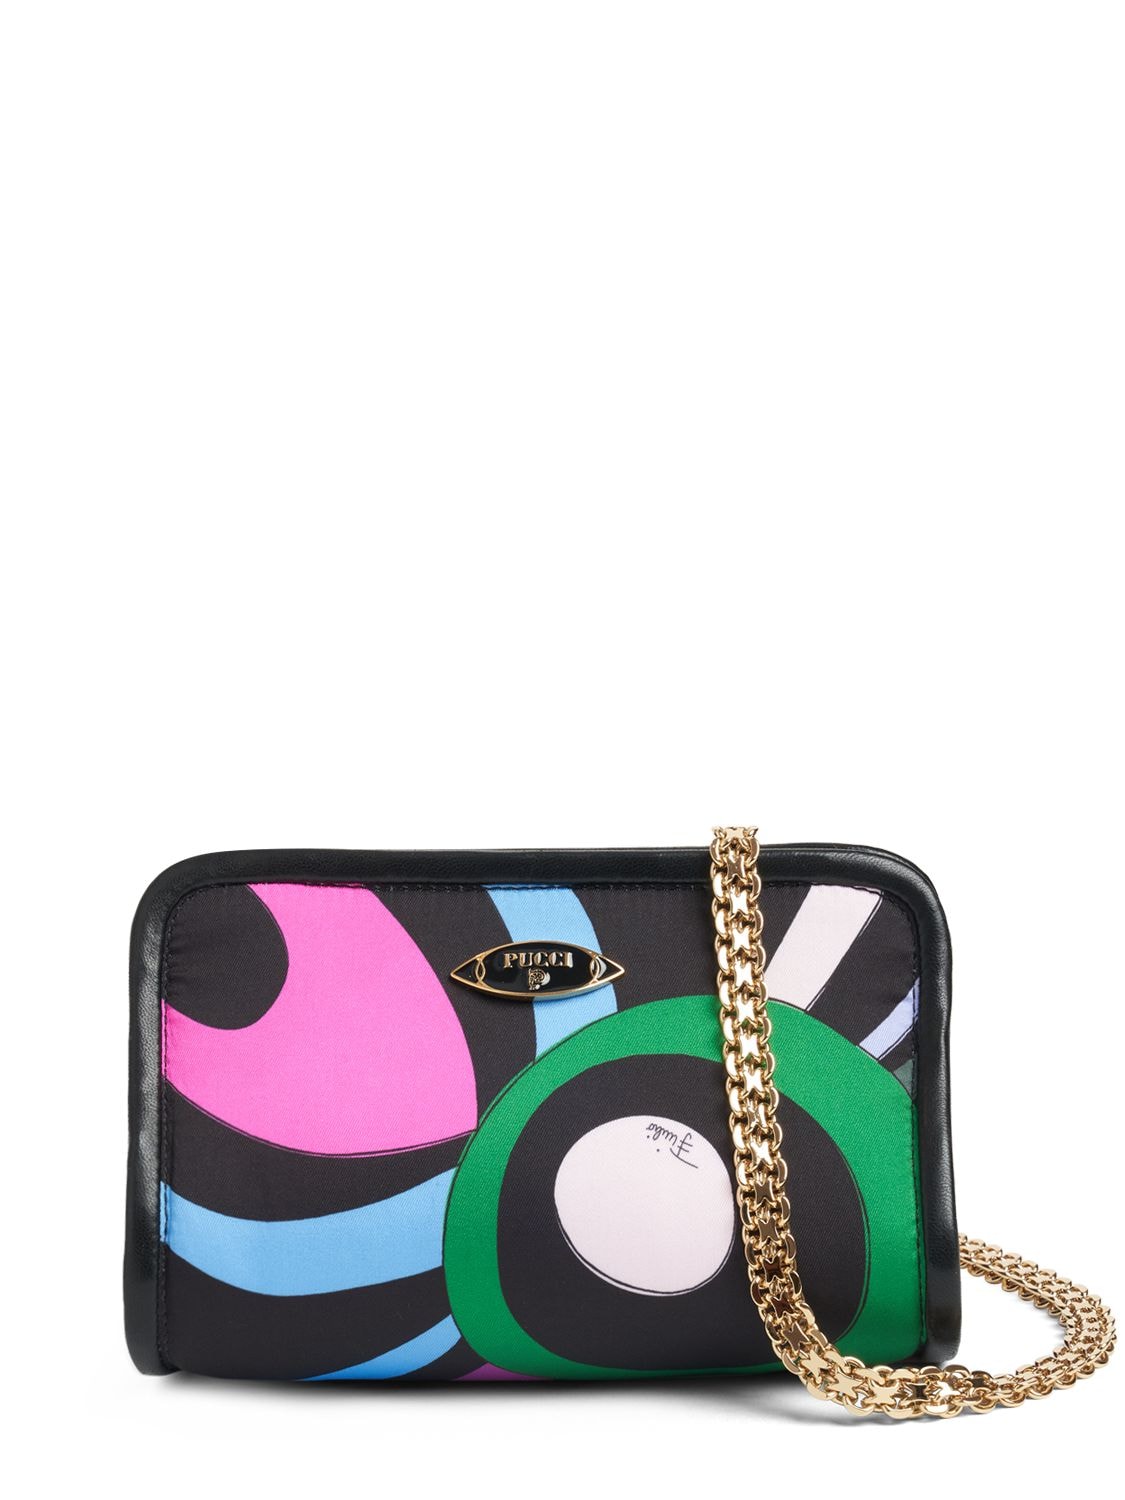 Pucci Printed Twill Binding Pouch In Fuchsia,verde